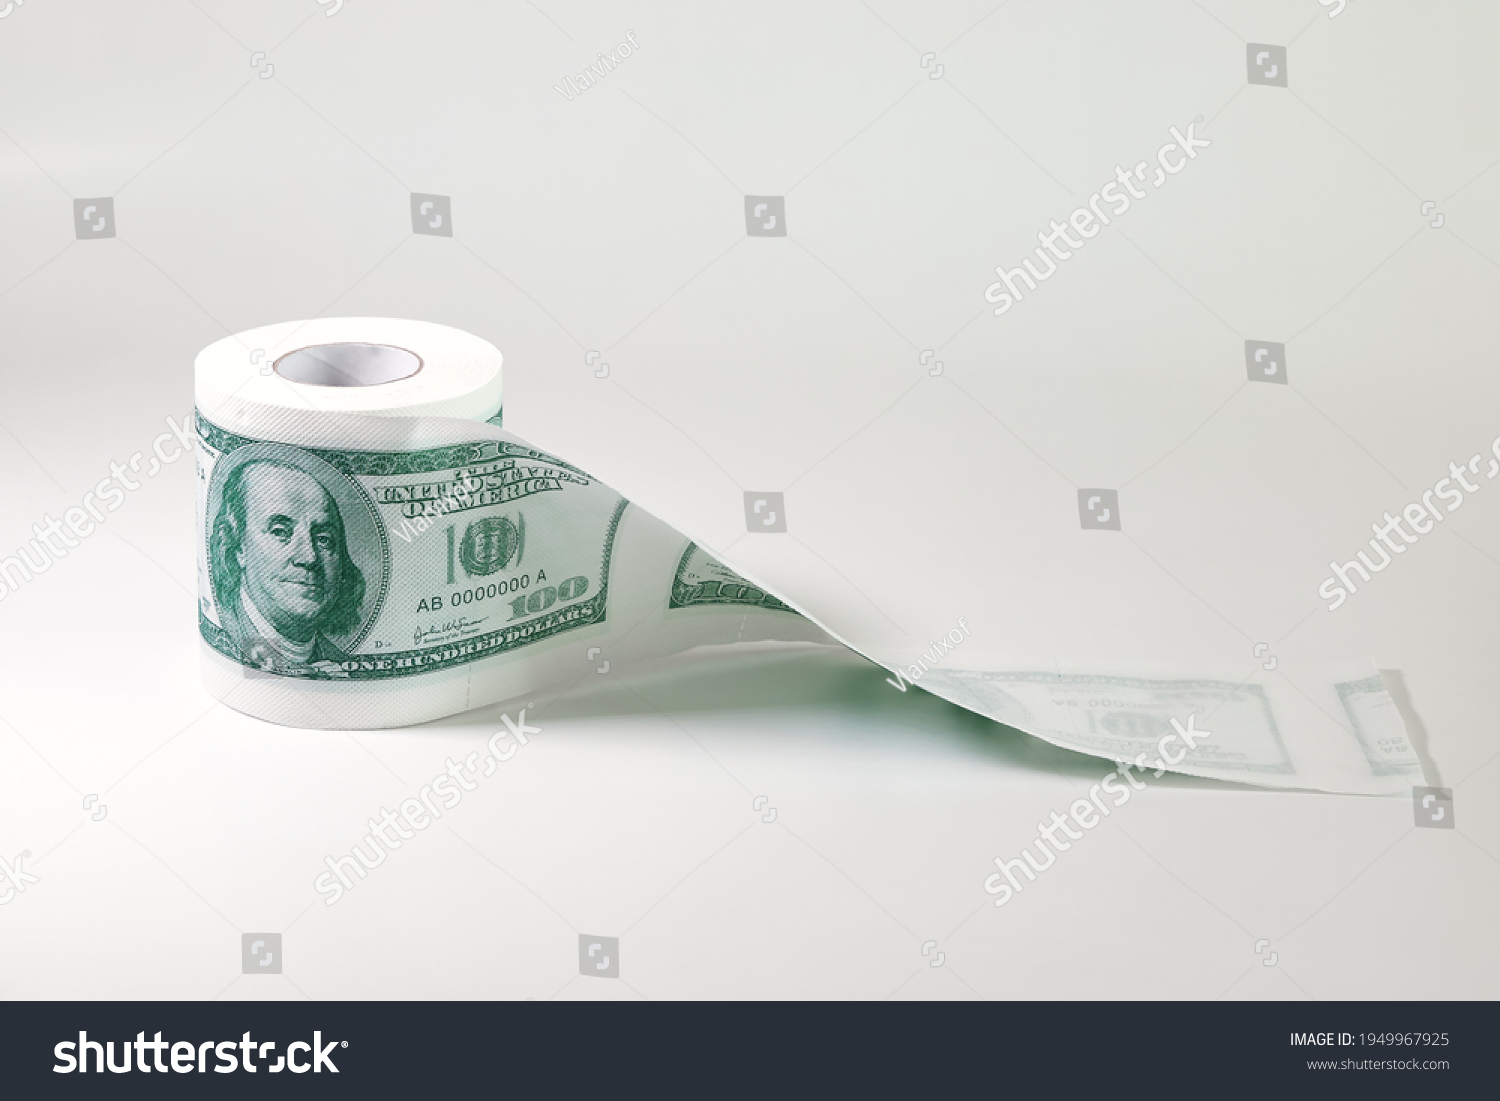 Roll of toilet paper in form of dollars, concept of deficit and inflation, on light background with copy space #1949967925